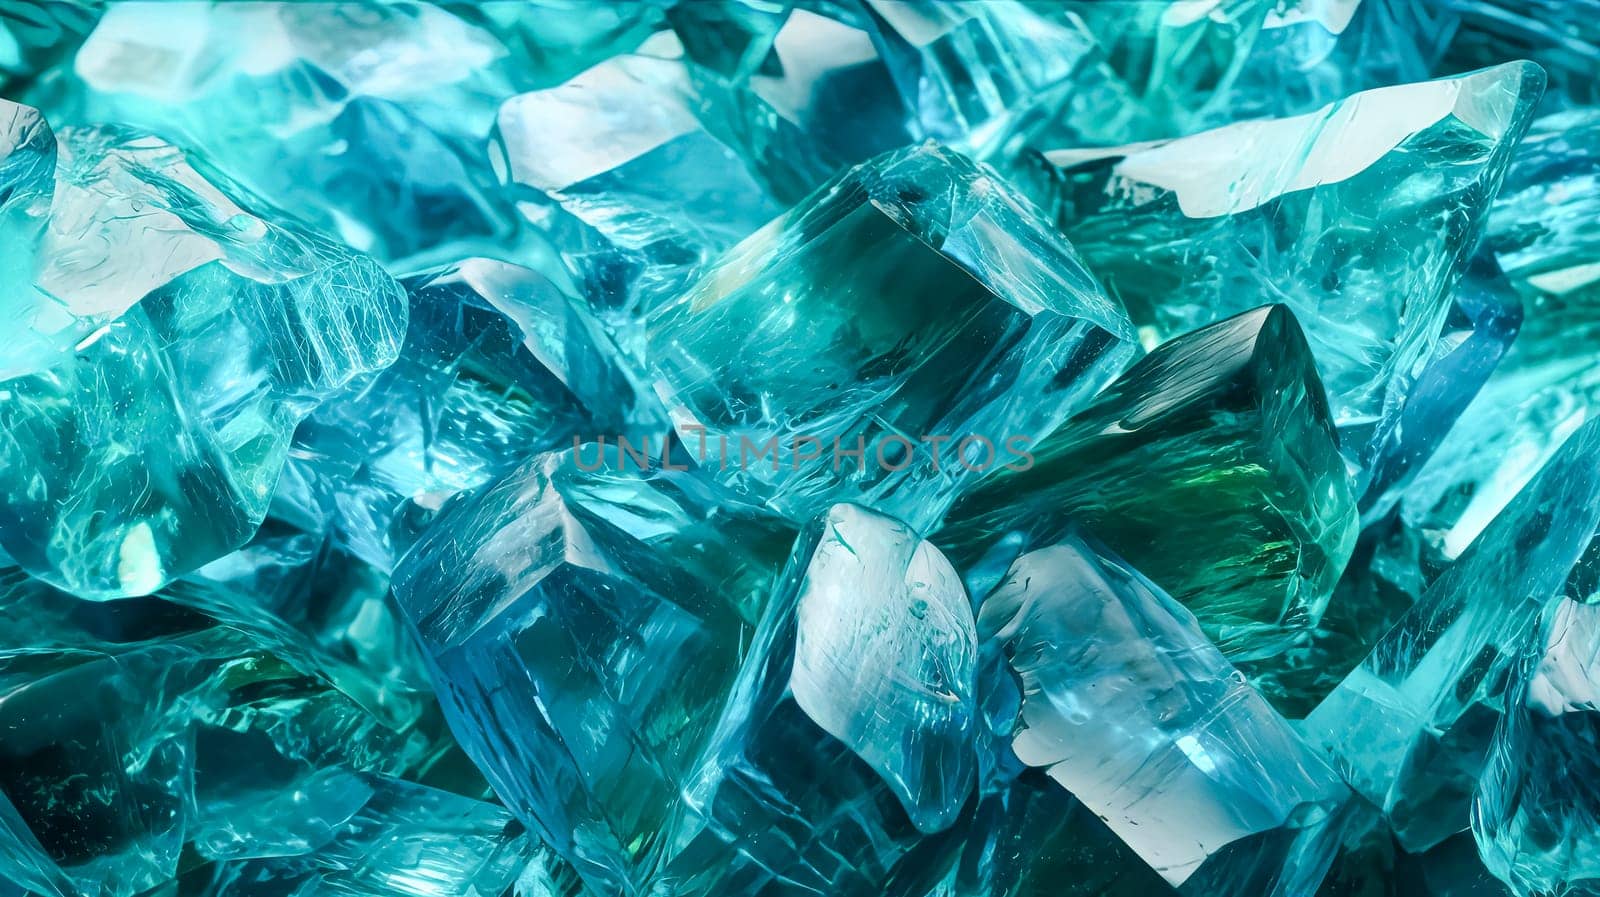 A blue crystal formation with many pieces. The blue color is very bright and the crystal formation is very large